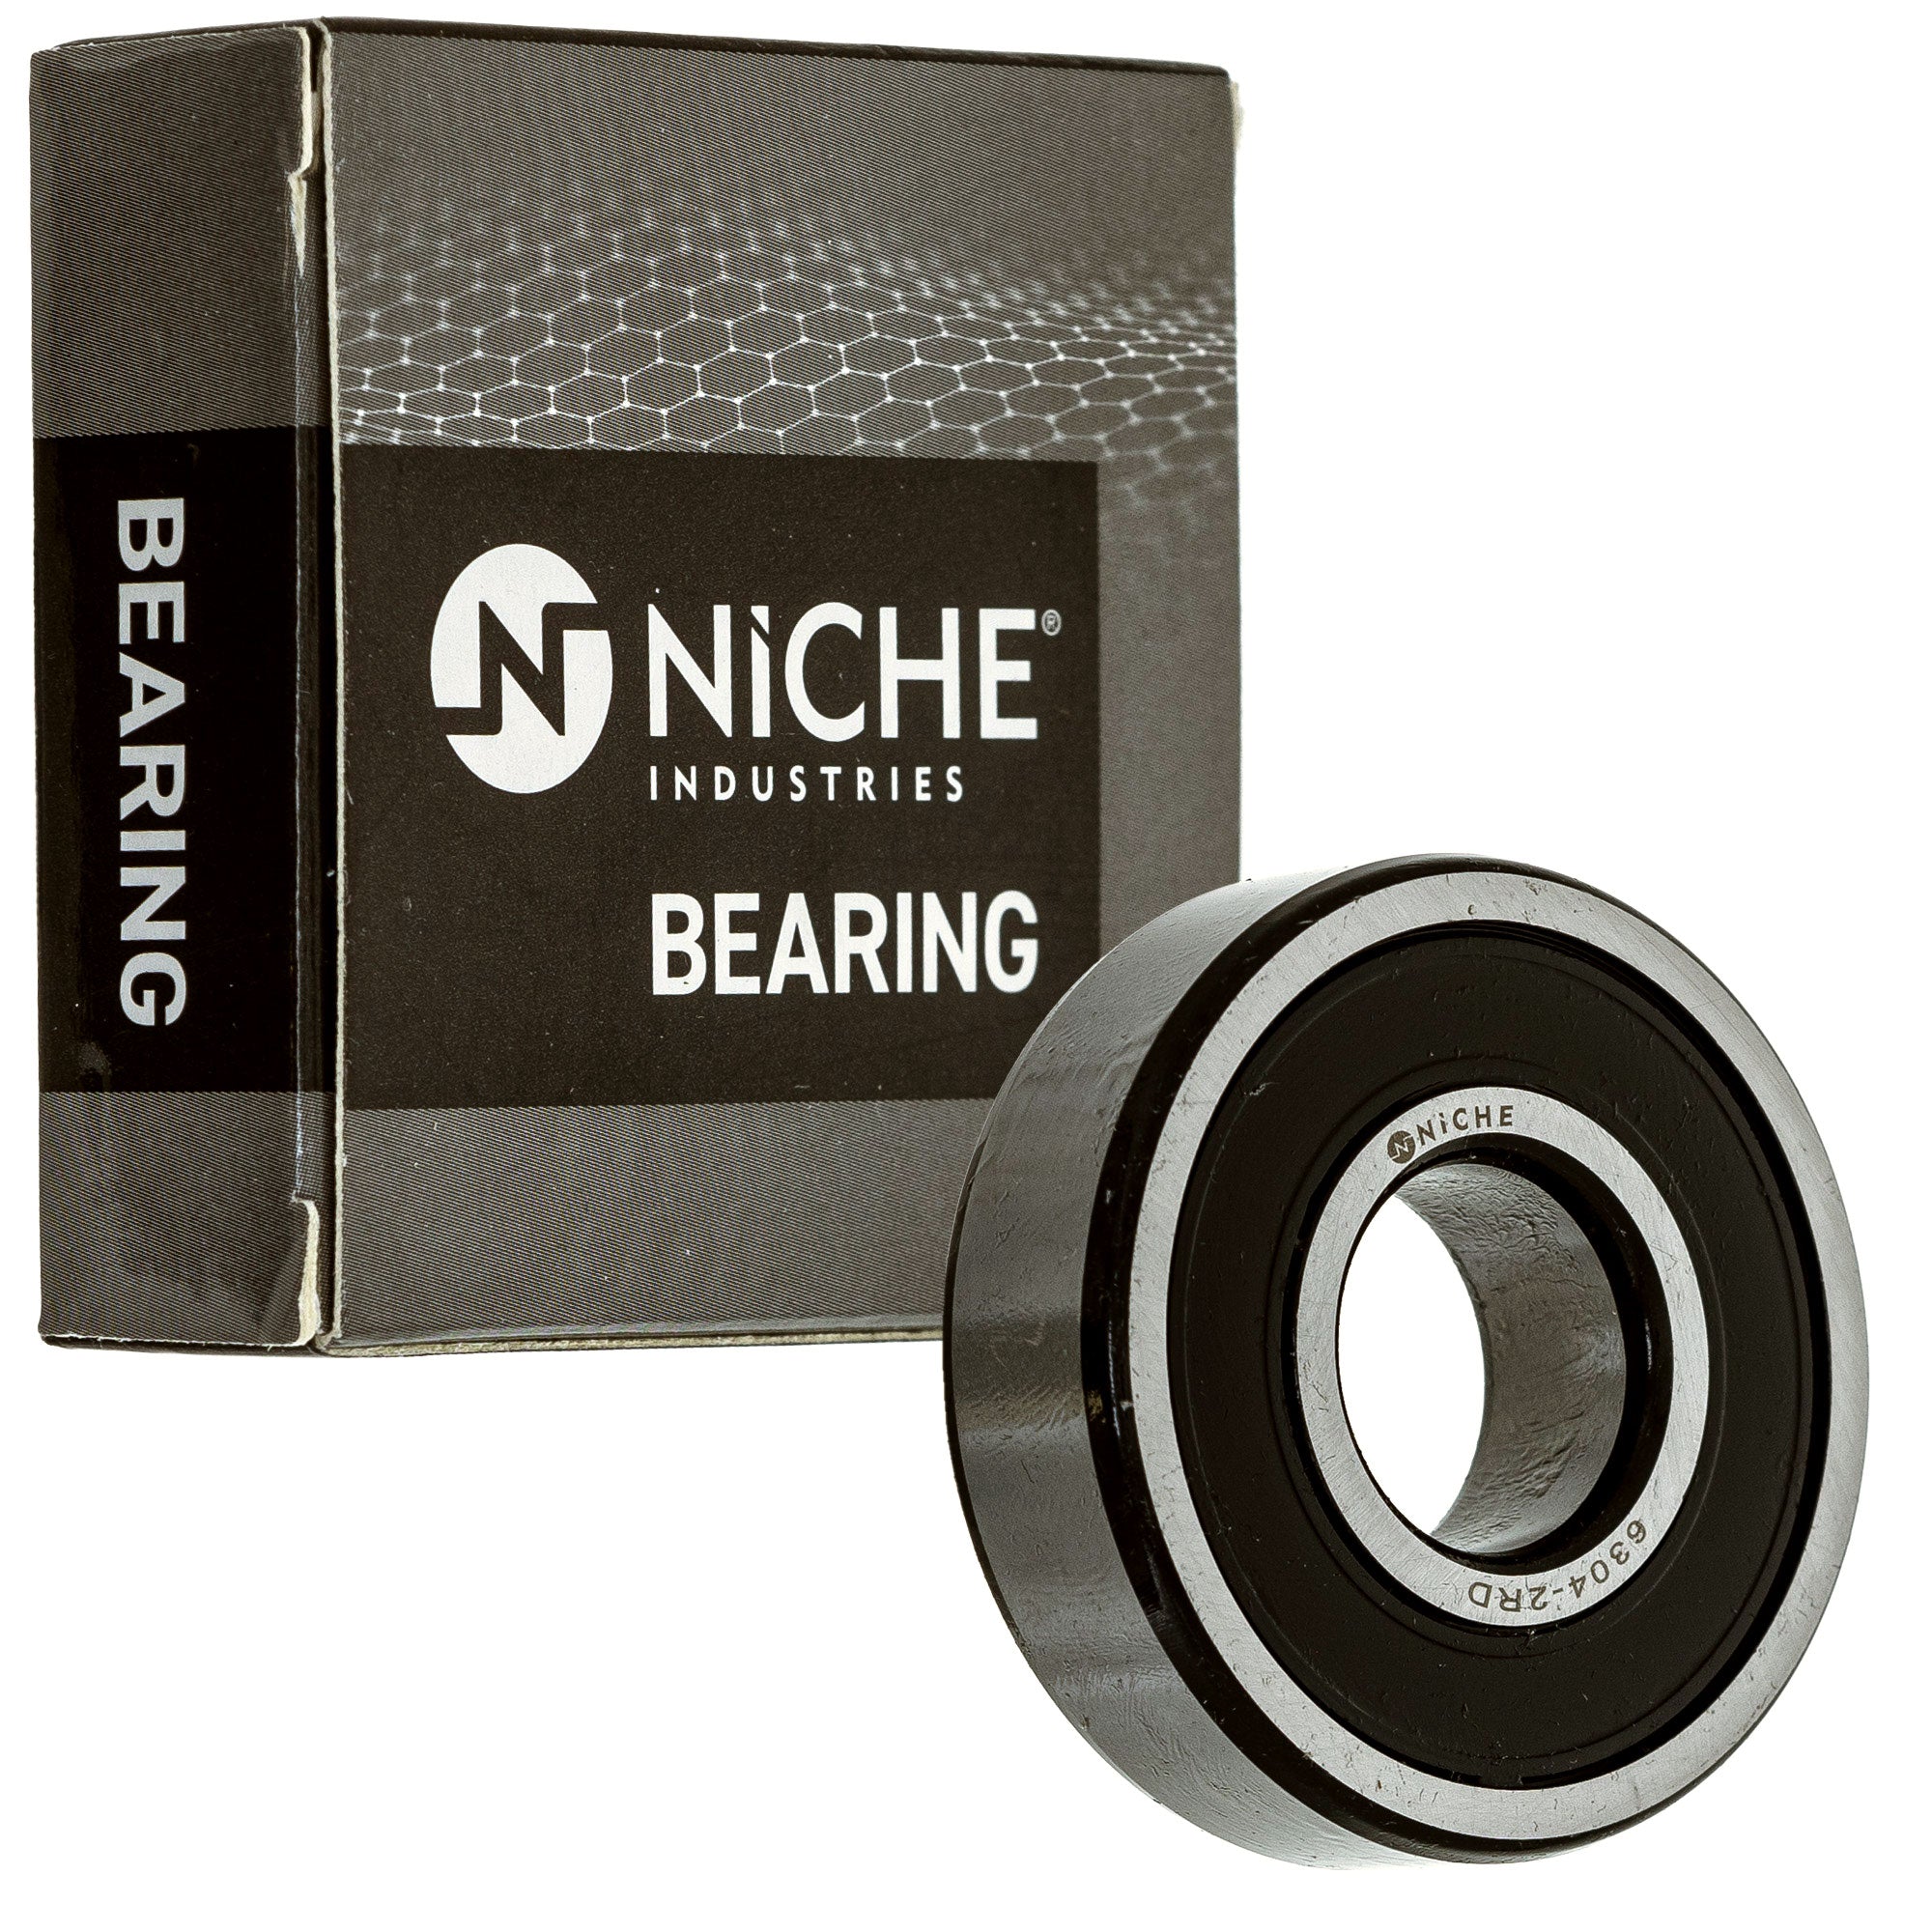 NICHE 519-CBB2207R Bearing & Seal Kit 2-Pack for zOTHER VTX1800T3